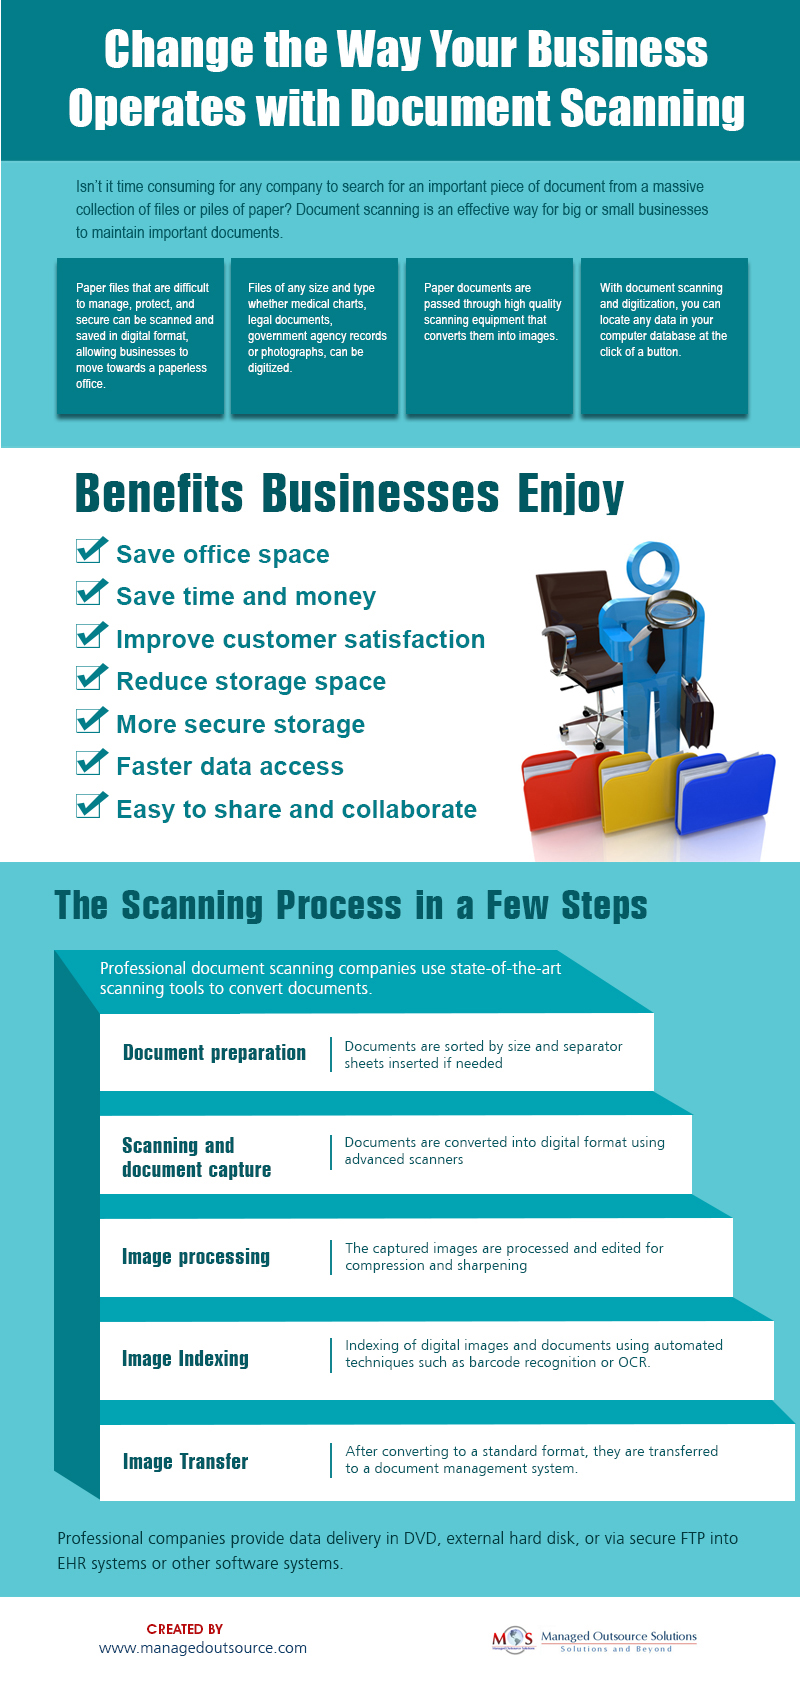 Change the Way Your Business Operates with Document Scanning